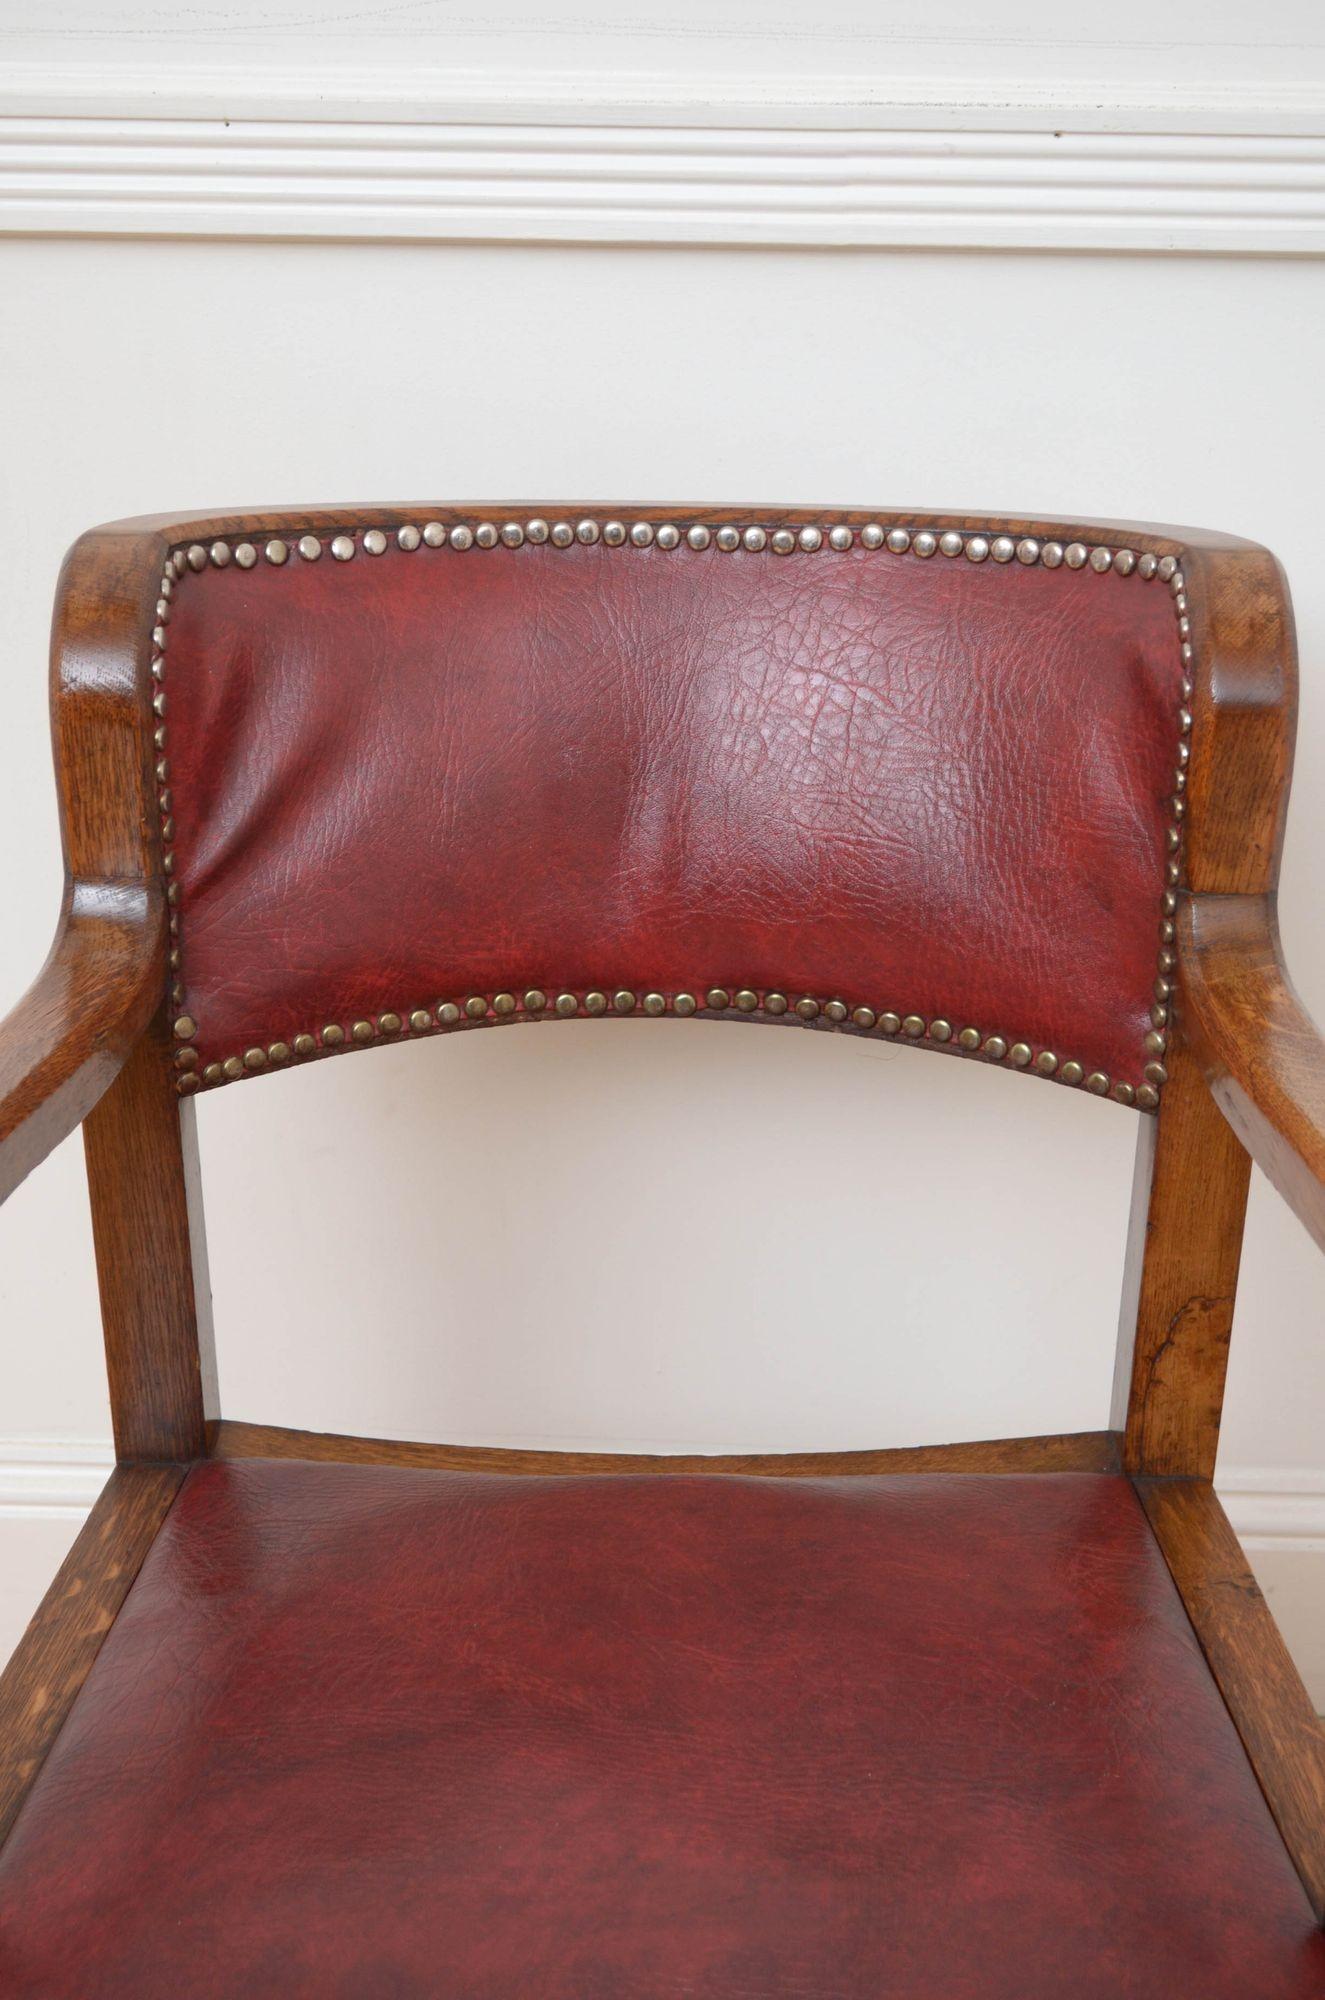 Sn5364 Stylish Arts and Crafts office chair / desk chair in oak, having shaped top rail with closely studded leather and drop in leather seat, both showing minor signs of usage, open, scroll arms and shaped legs united by a stretcher. This antique